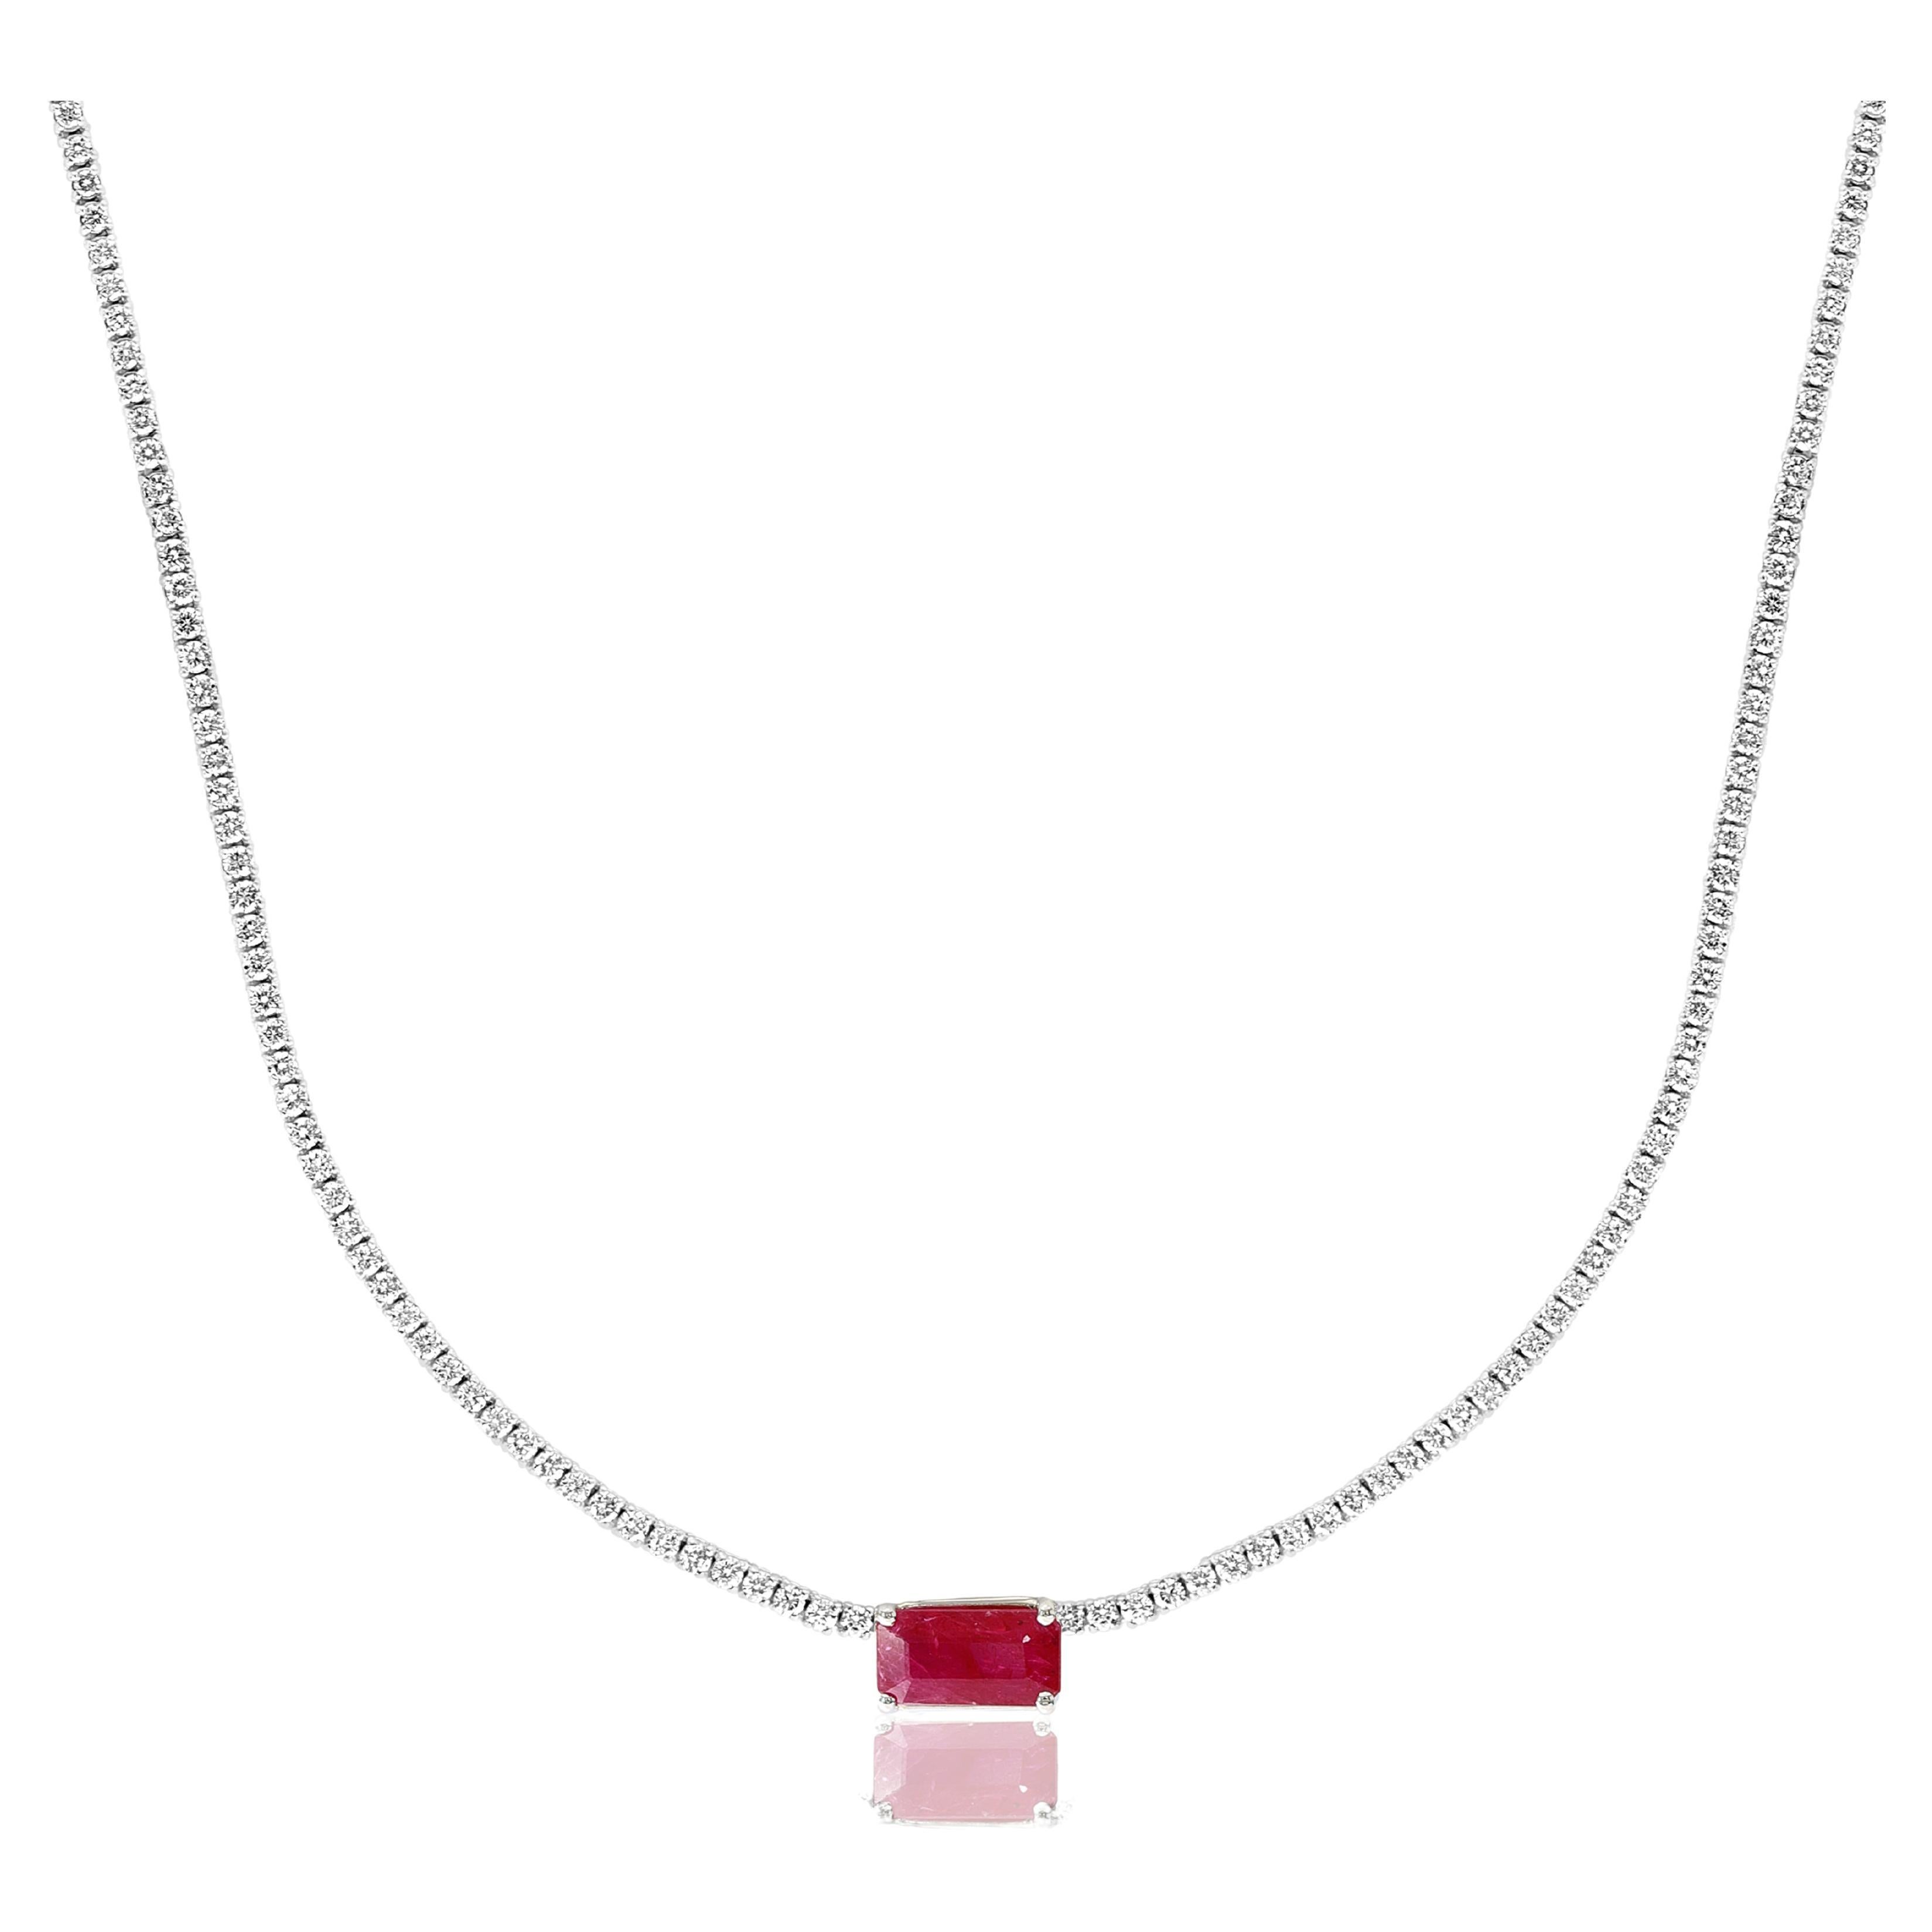 2.63 Carat Emerald Cut Ruby and Diamond Tennis Necklace in 14K White Gold